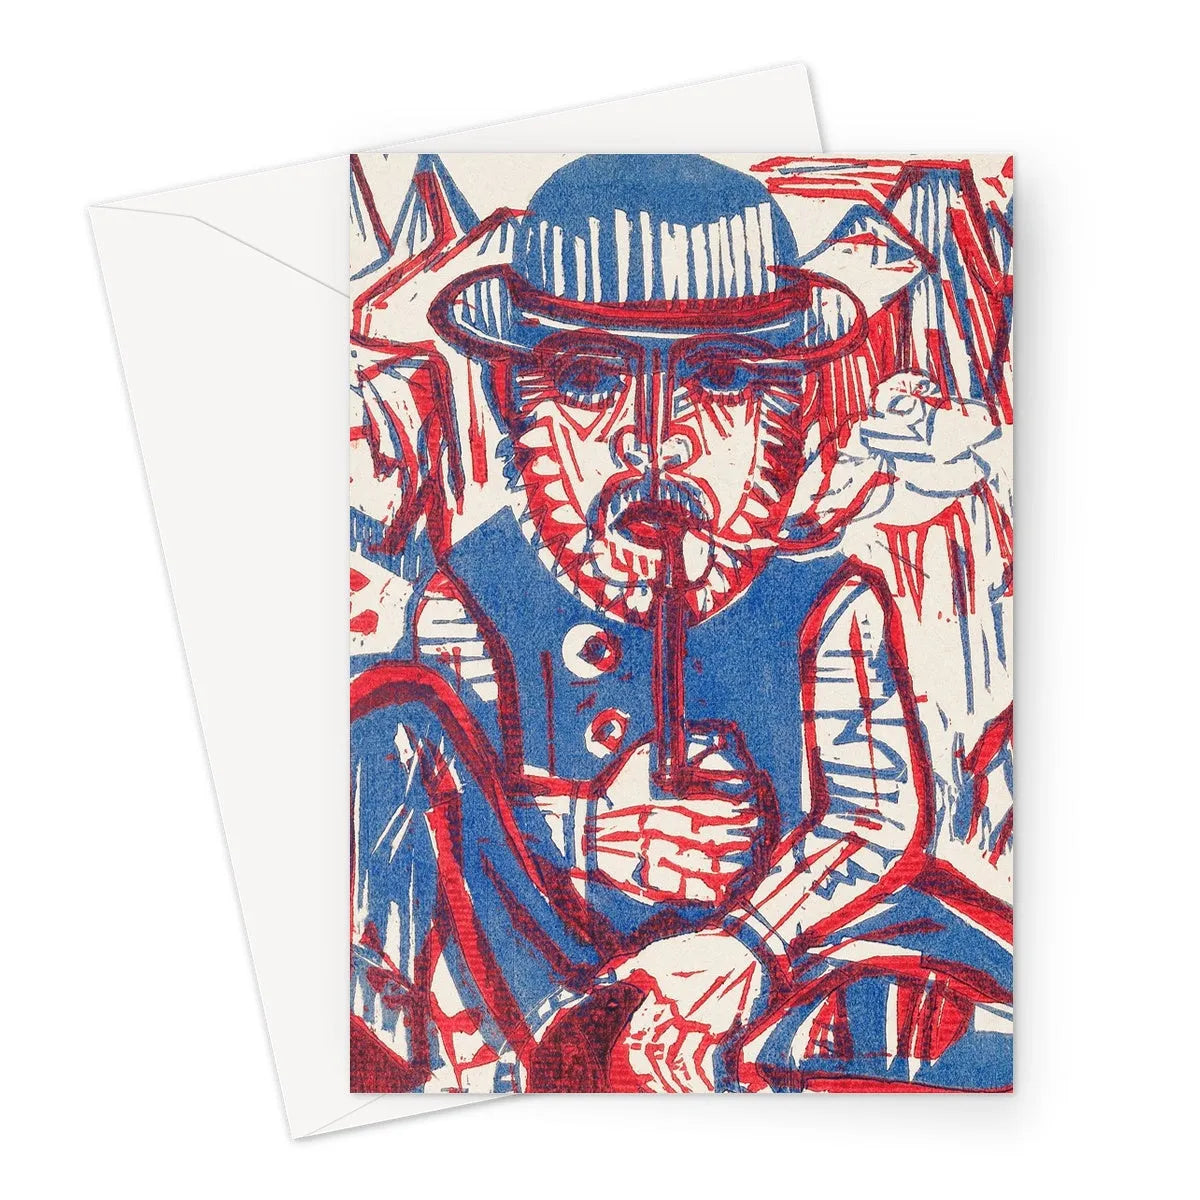 Smoking Peasant By Ernst Ludwig Kirchner Greeting Card - A5 Portrait / 1 Card - Notebooks & Notepads - Aesthetic Art